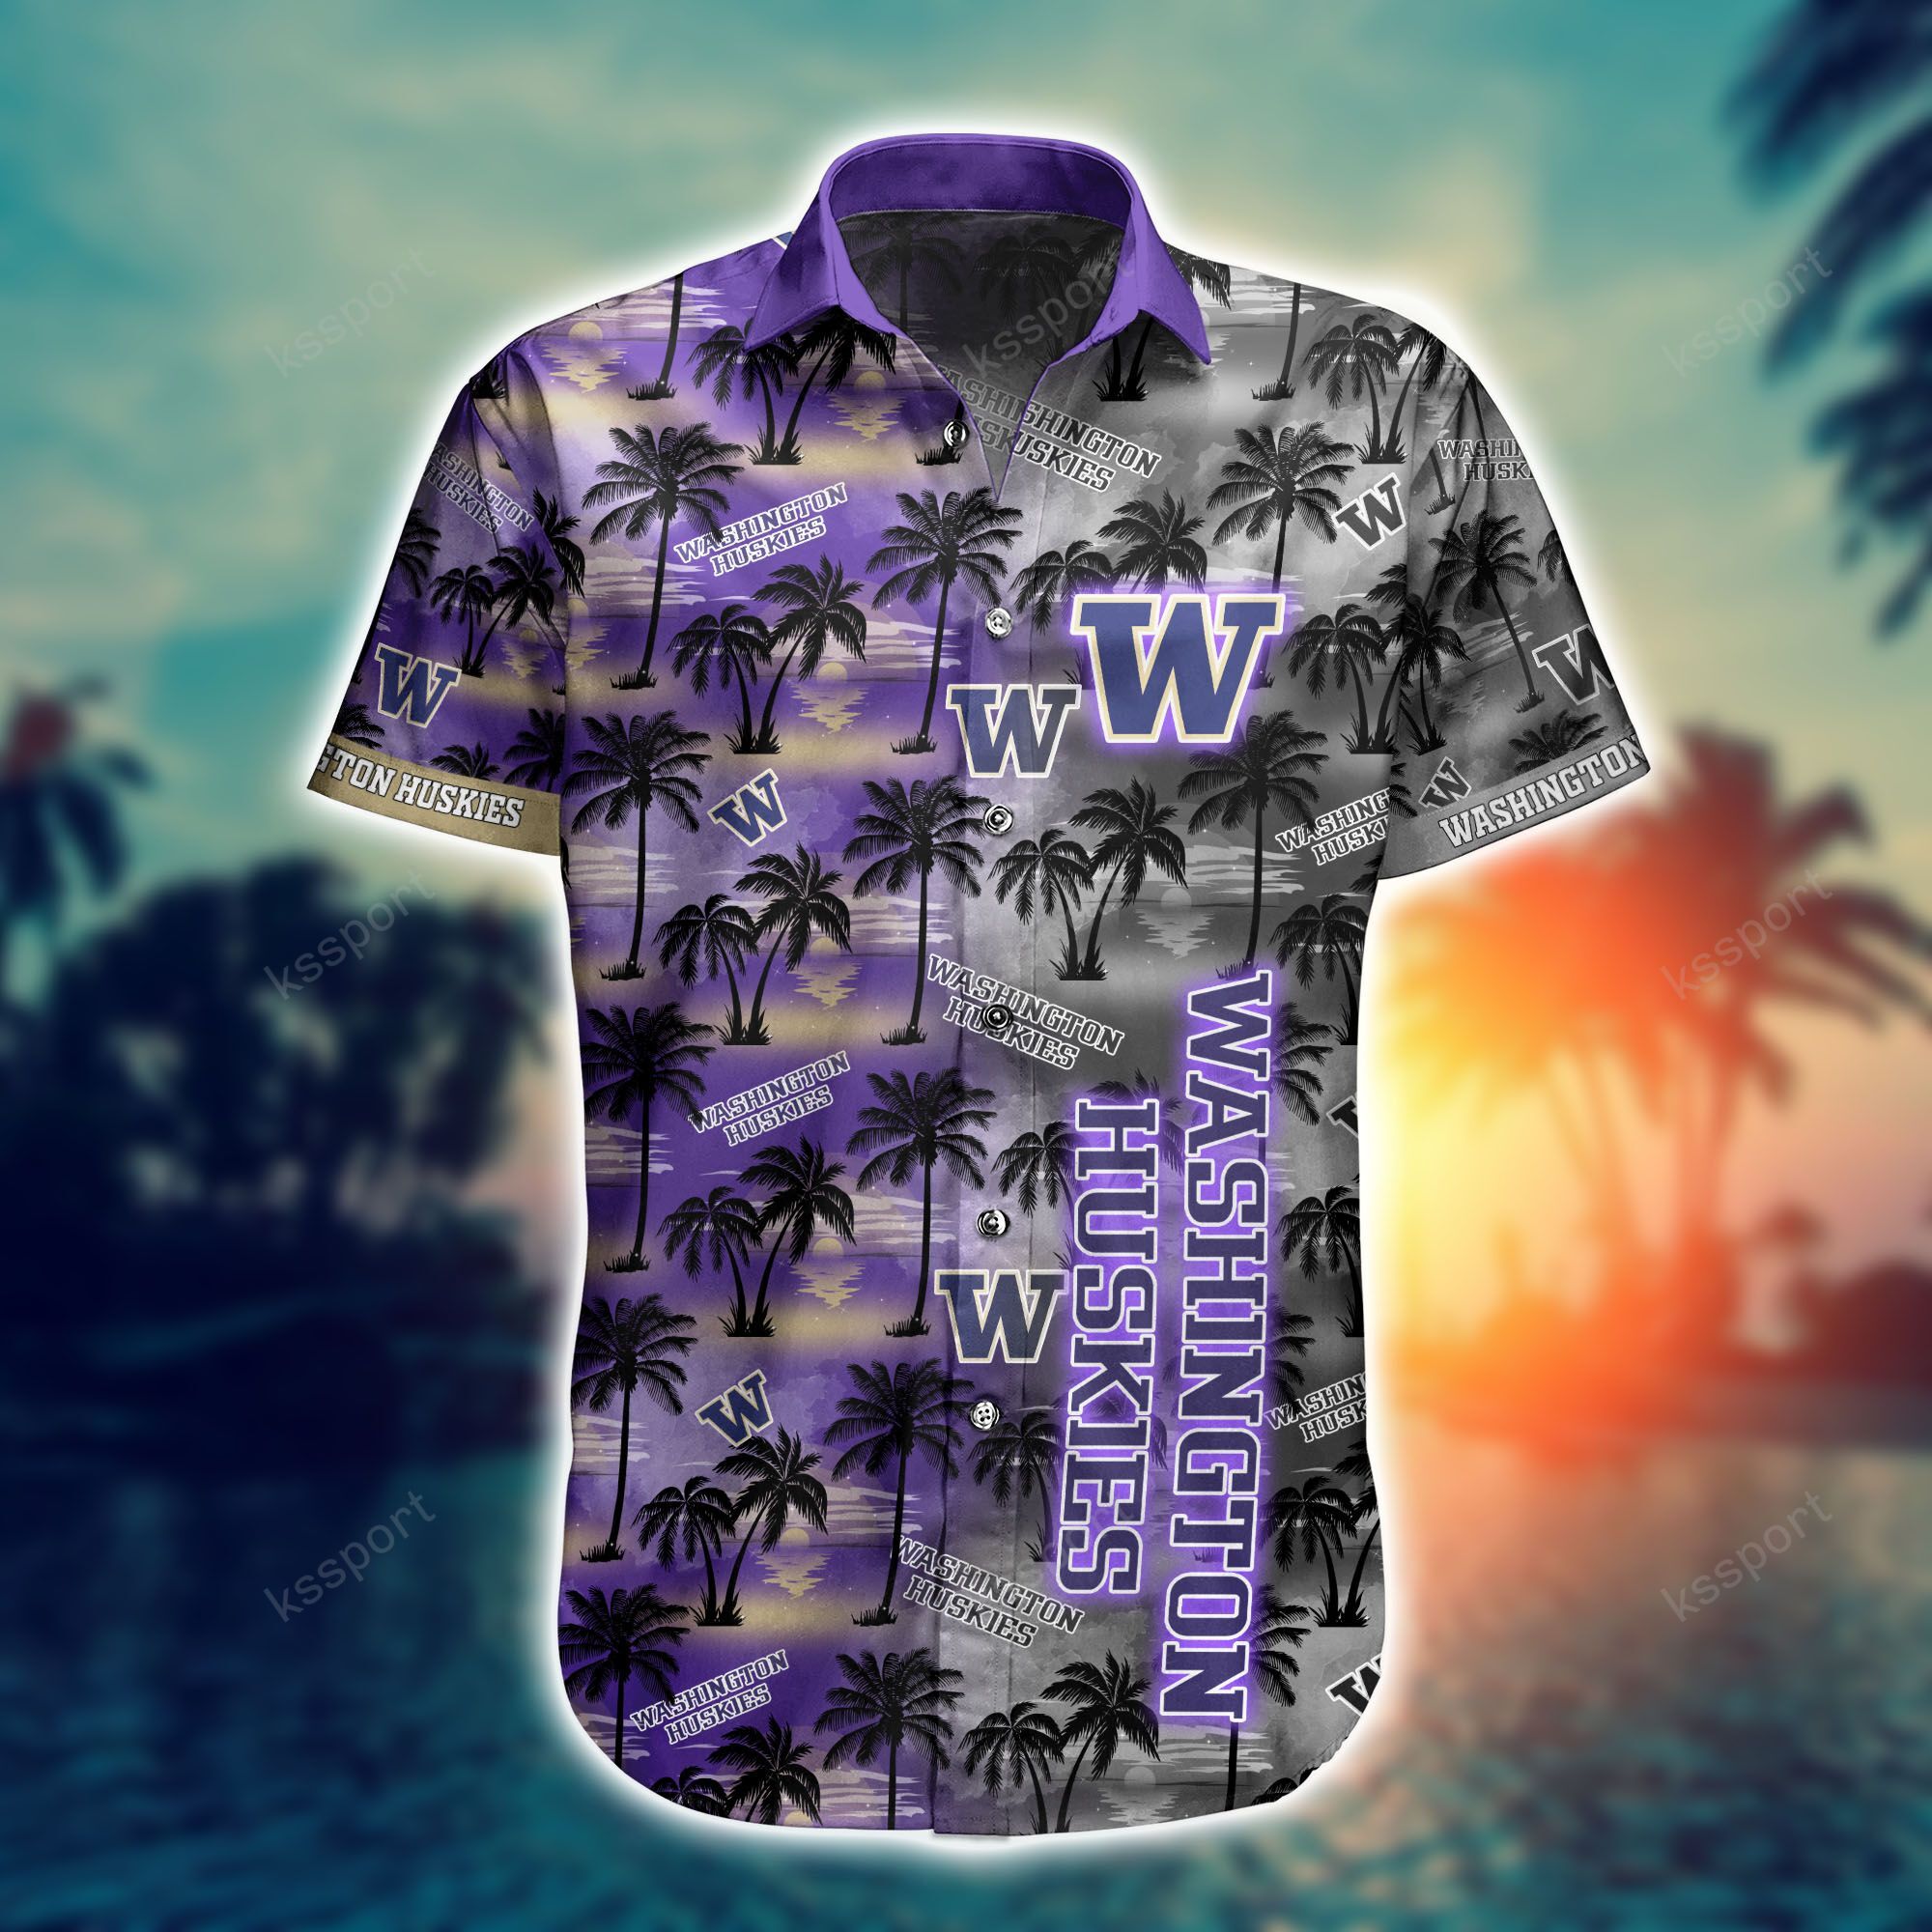 Top cool Hawaiian shirt 2022 - Make sure you get yours today before they run out! 187